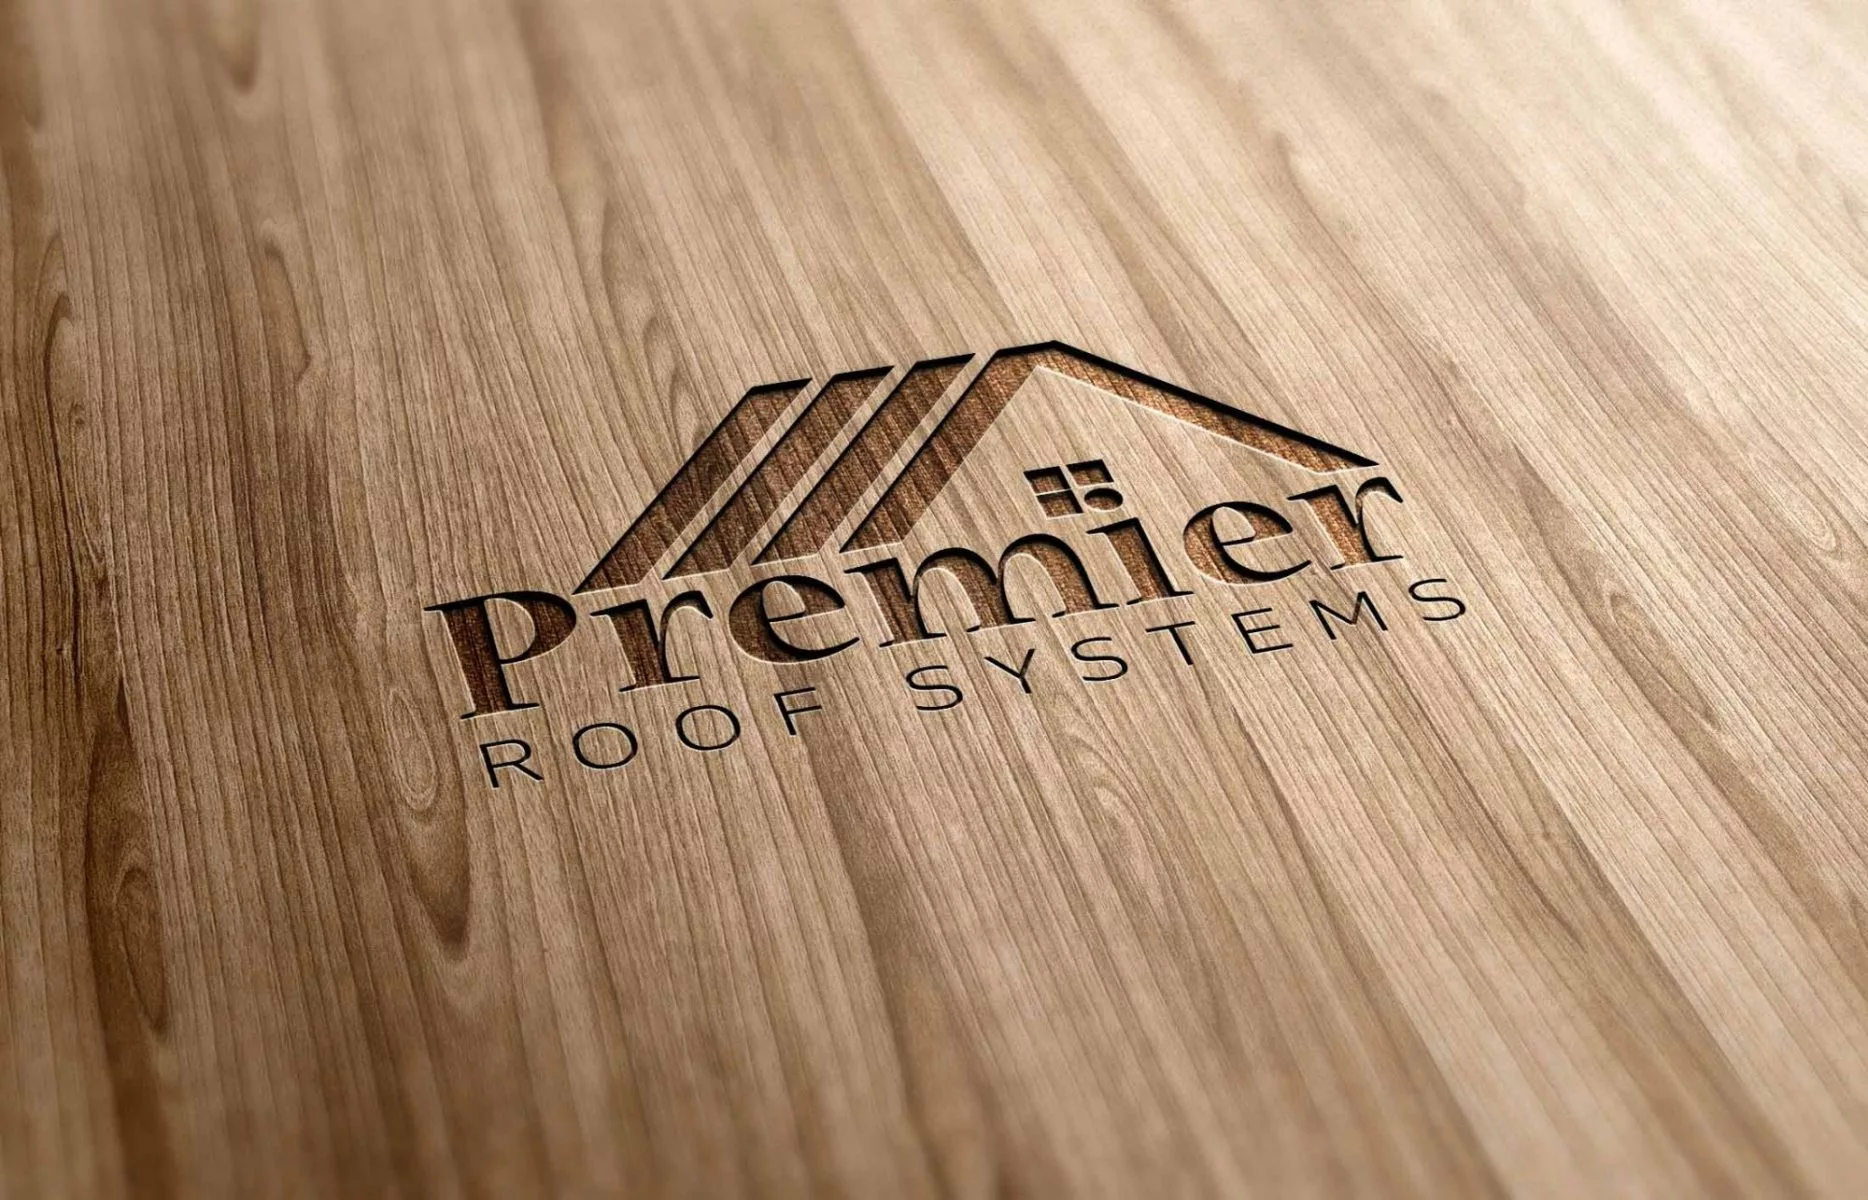 Premier Roof Systems - Wooden Logo Effect